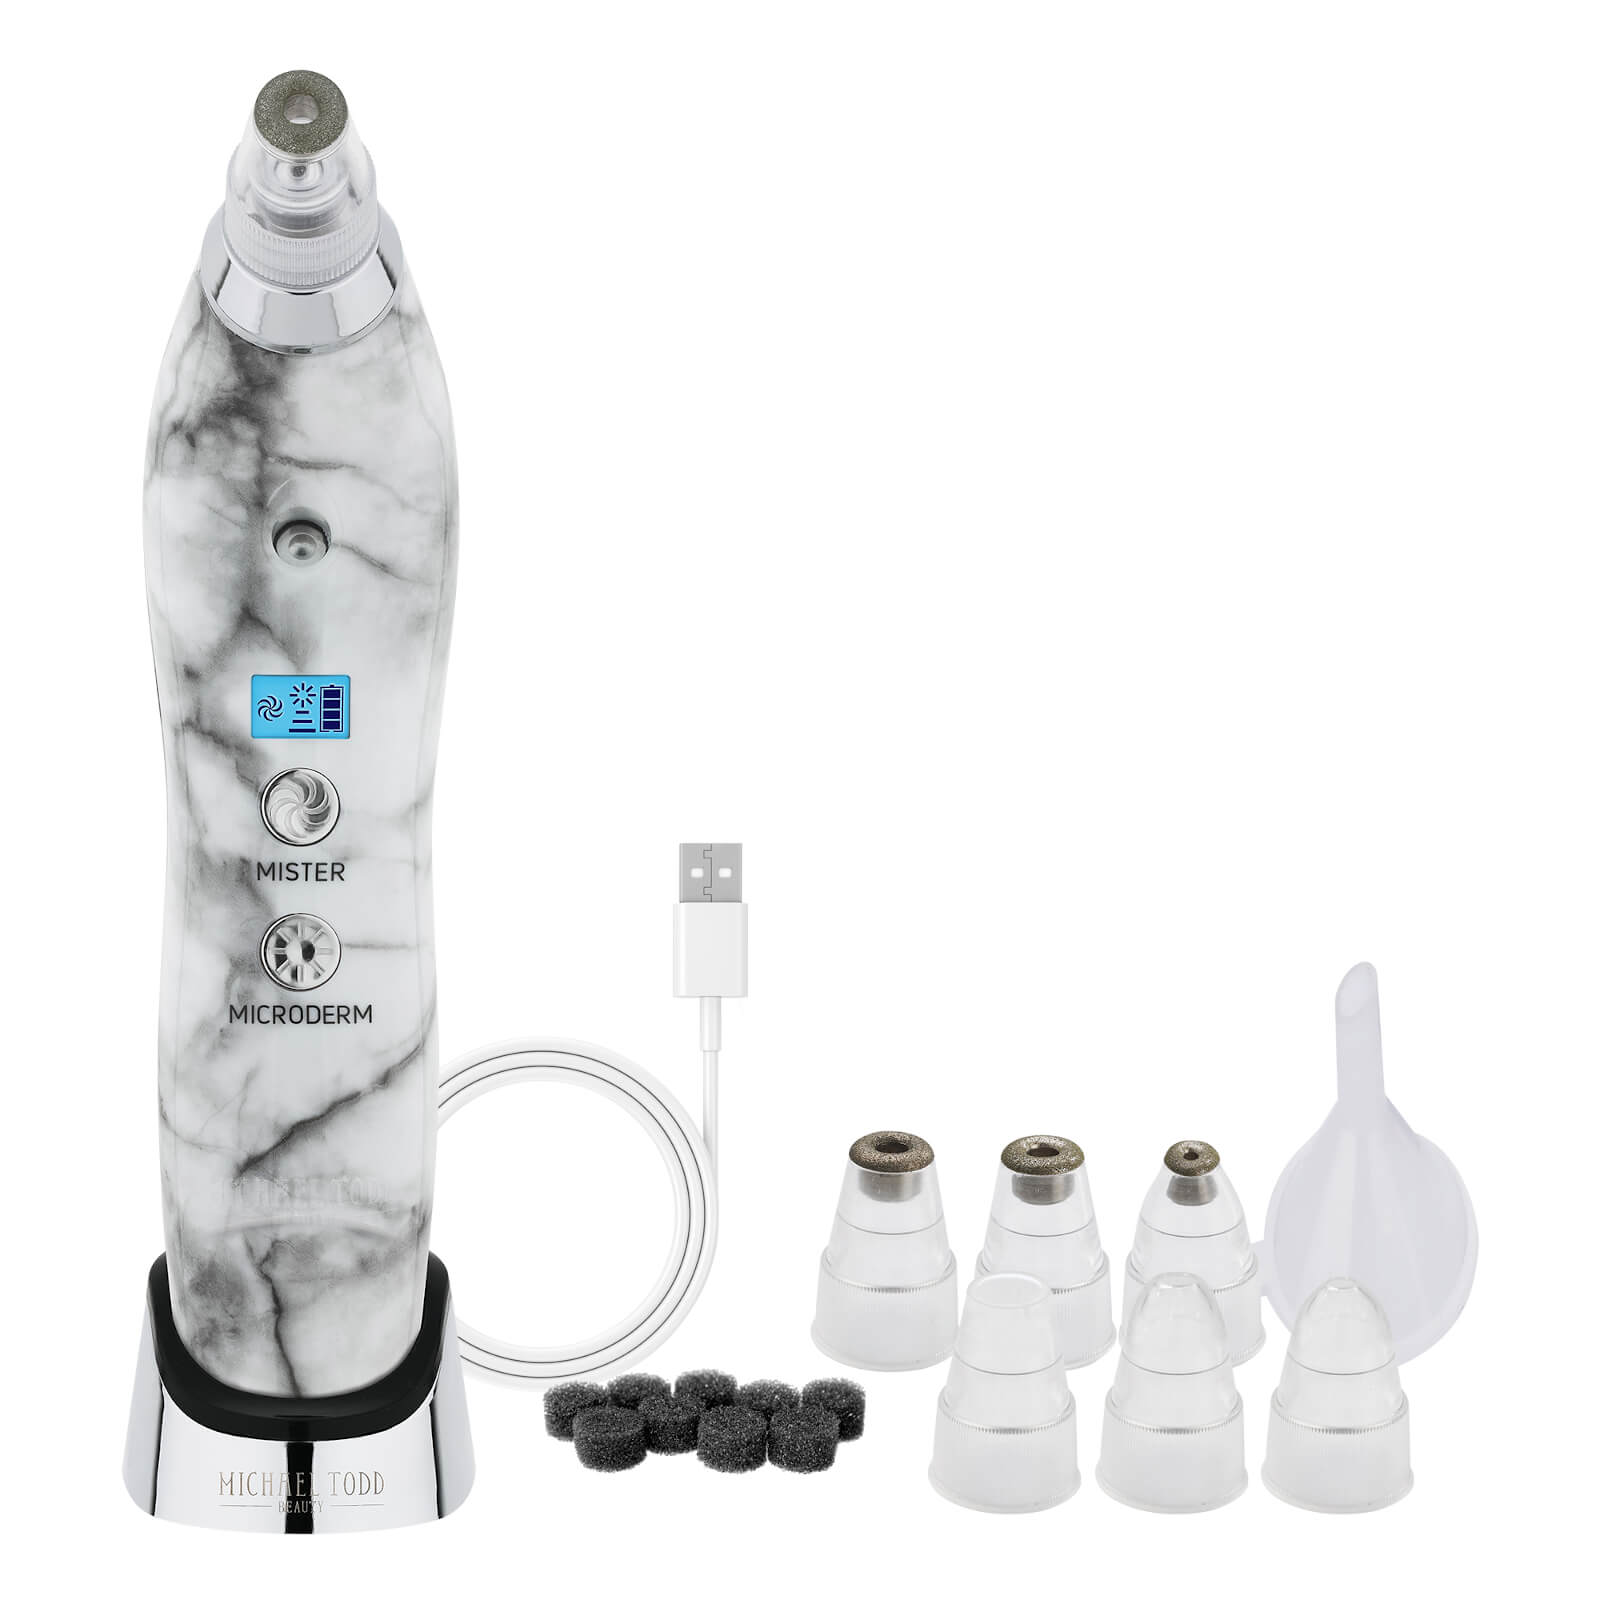 Michael Todd Beauty Sonic Refresher Wet/Dry Sonic Microdermabrasion and Pore Extraction System (Various Shades) - White Marble